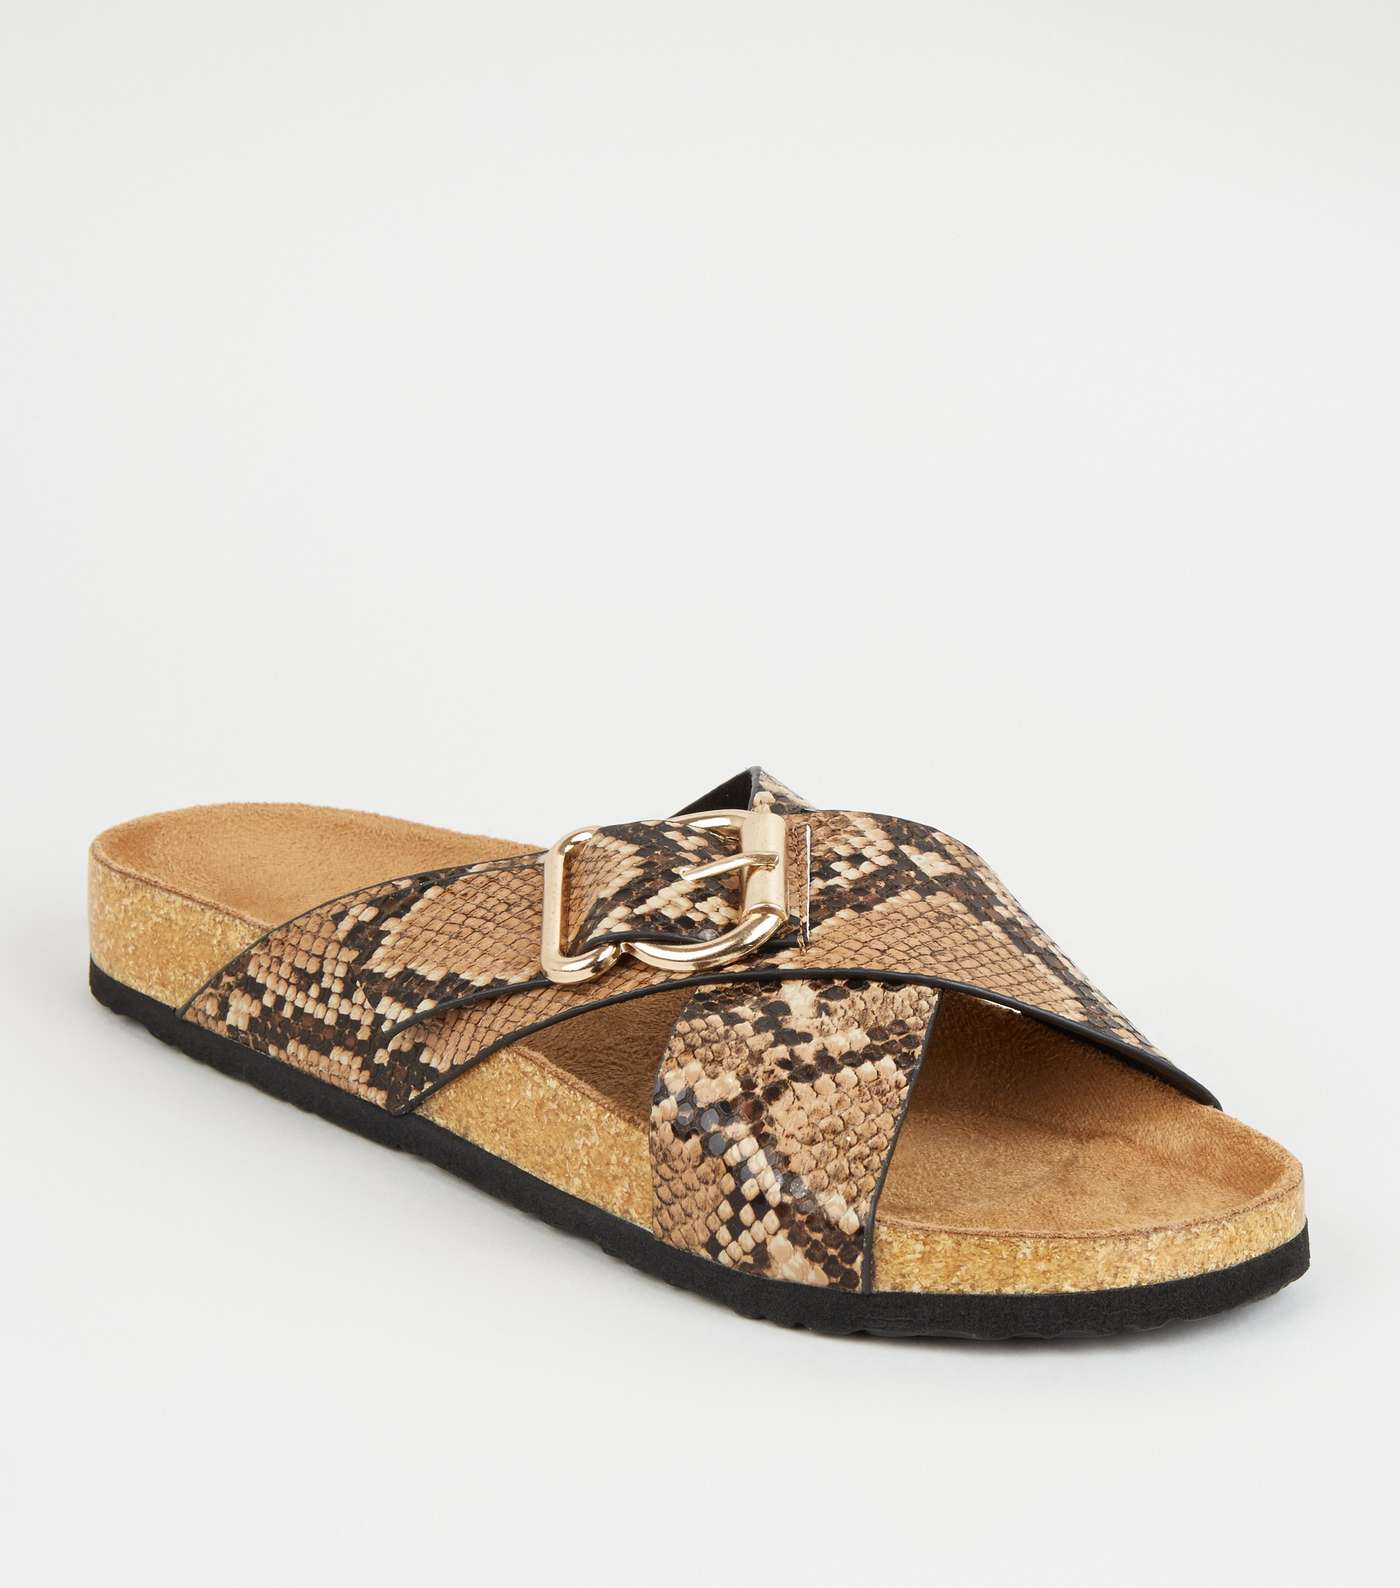 Stone Faux Snake Cross Strap Footbed Sliders